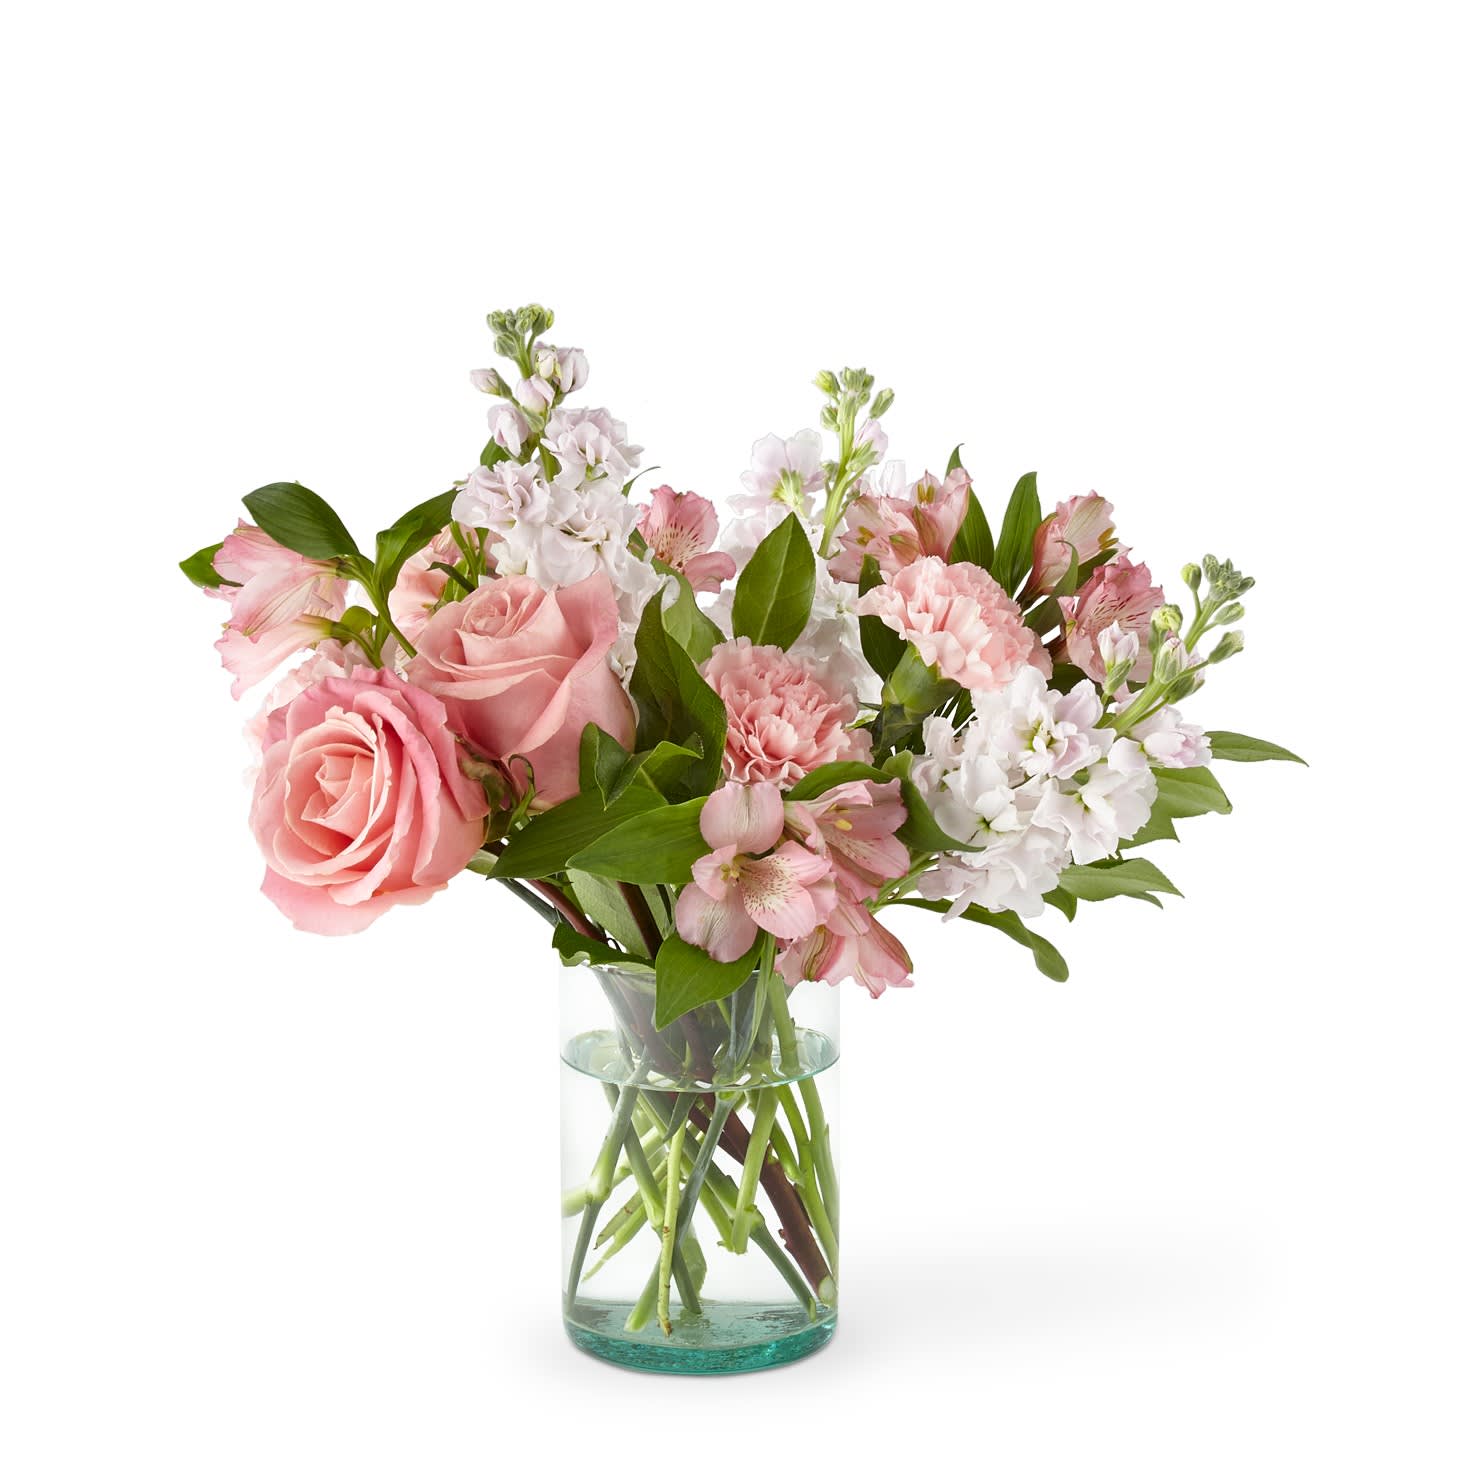 Rose Quartz Bouquet - A rosy bouquet of roses, stock, carnations, and alstromeria arranged in a clear vase.